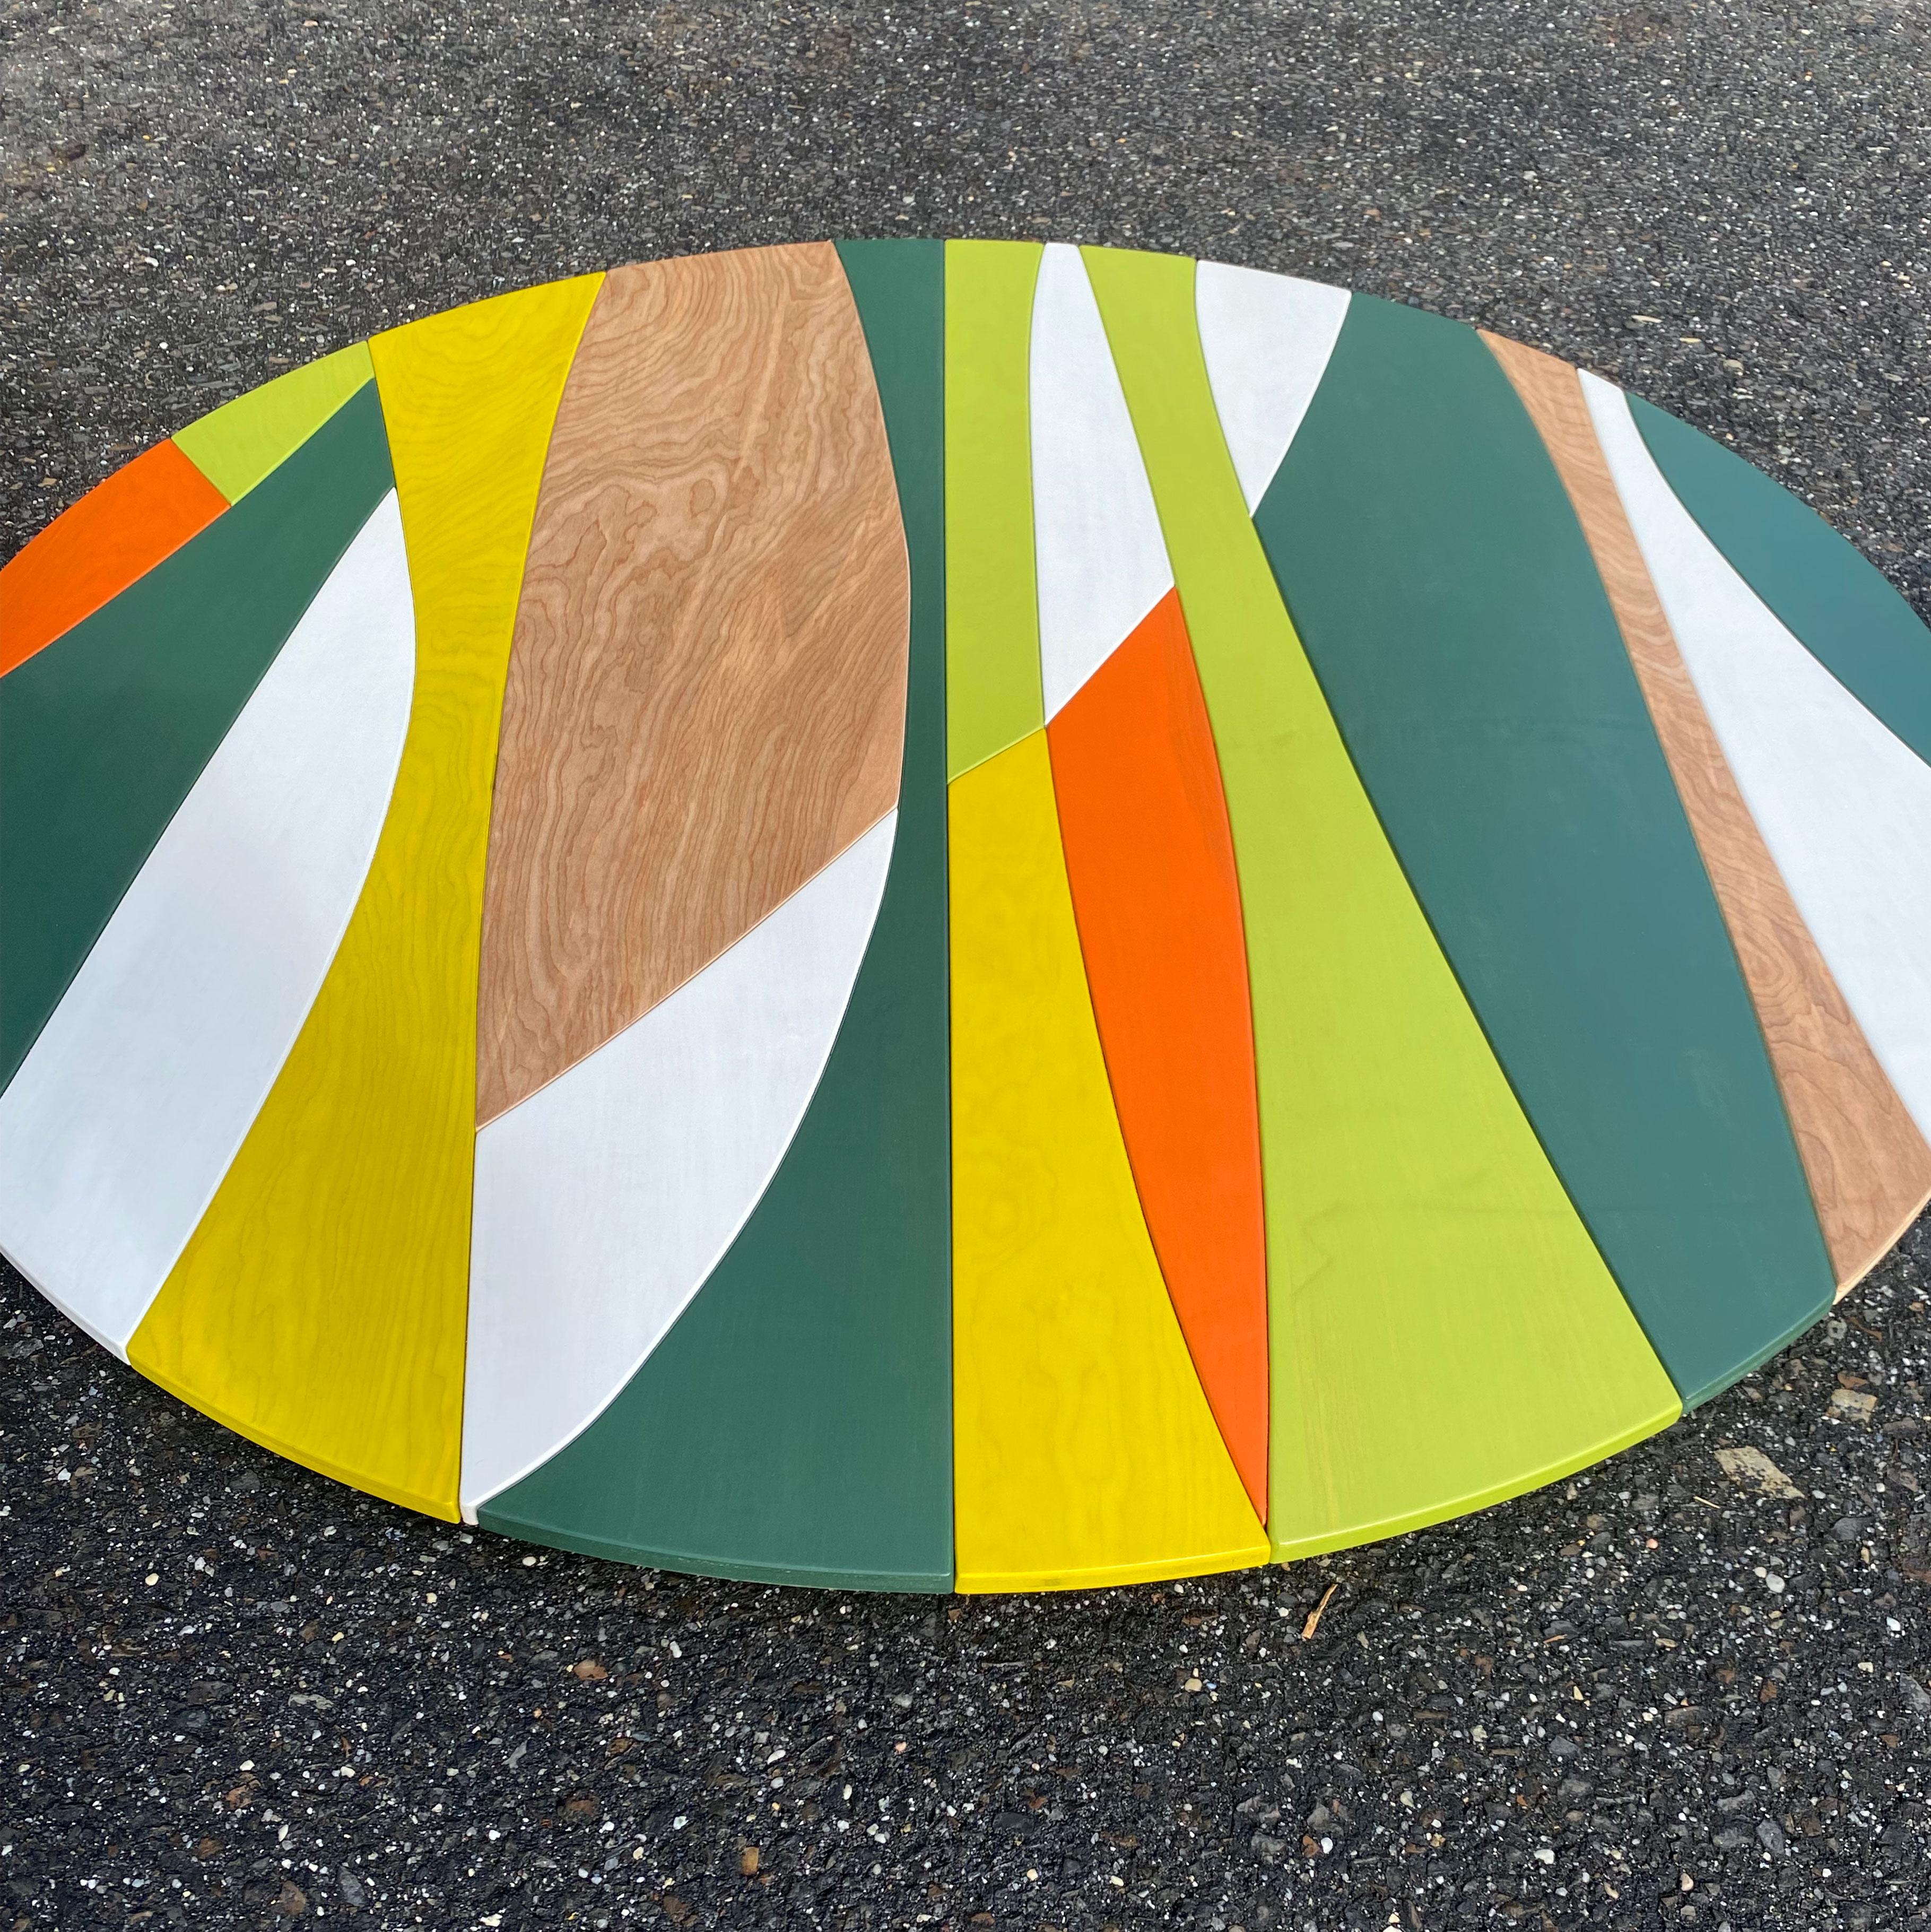 Solar Circle (Luau color way) is a modern, abstract, wood wall sculpture made from acrylic, birch and satin lacquer. The piece was inspired by the flowing organic lines of mid century modern design which combined bold colors with the warmth of wood